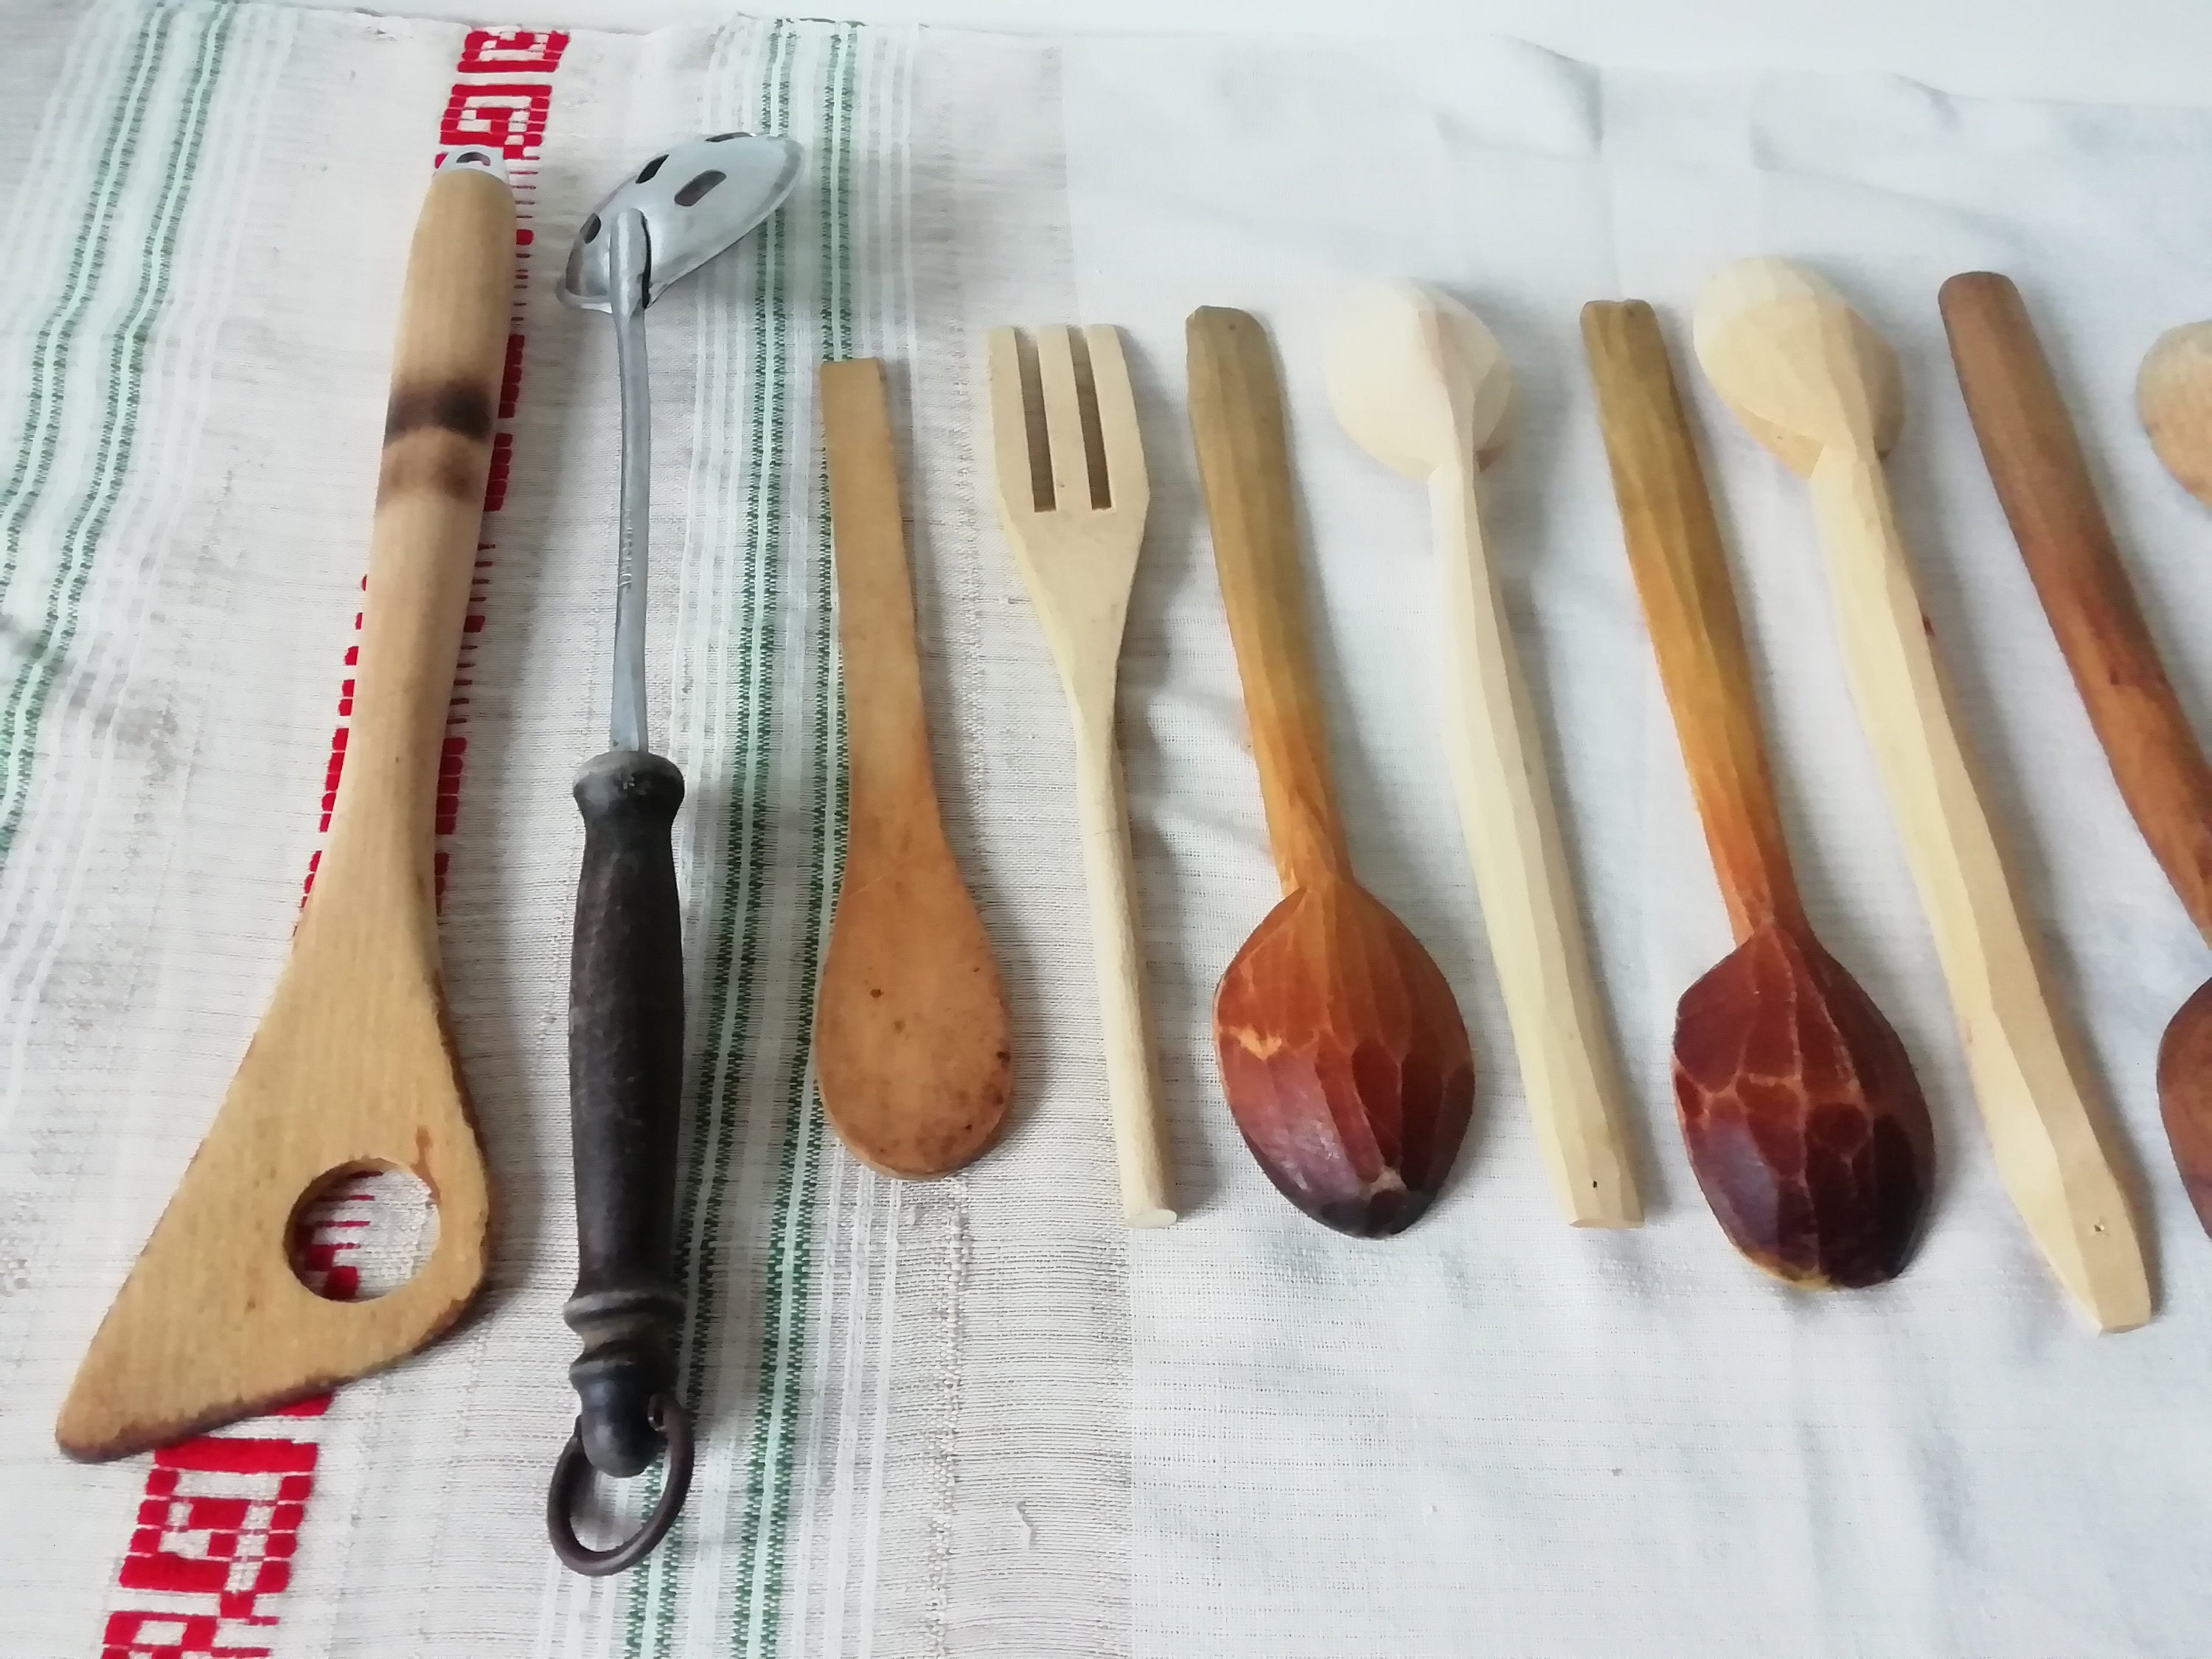 Vintage Wooden Kitchen Utensils, Old Rustic Wood Spoons Spatulas Fork  Rolling Pin, Primitive Kitchen Country Decor, Antique Food Photo Props 